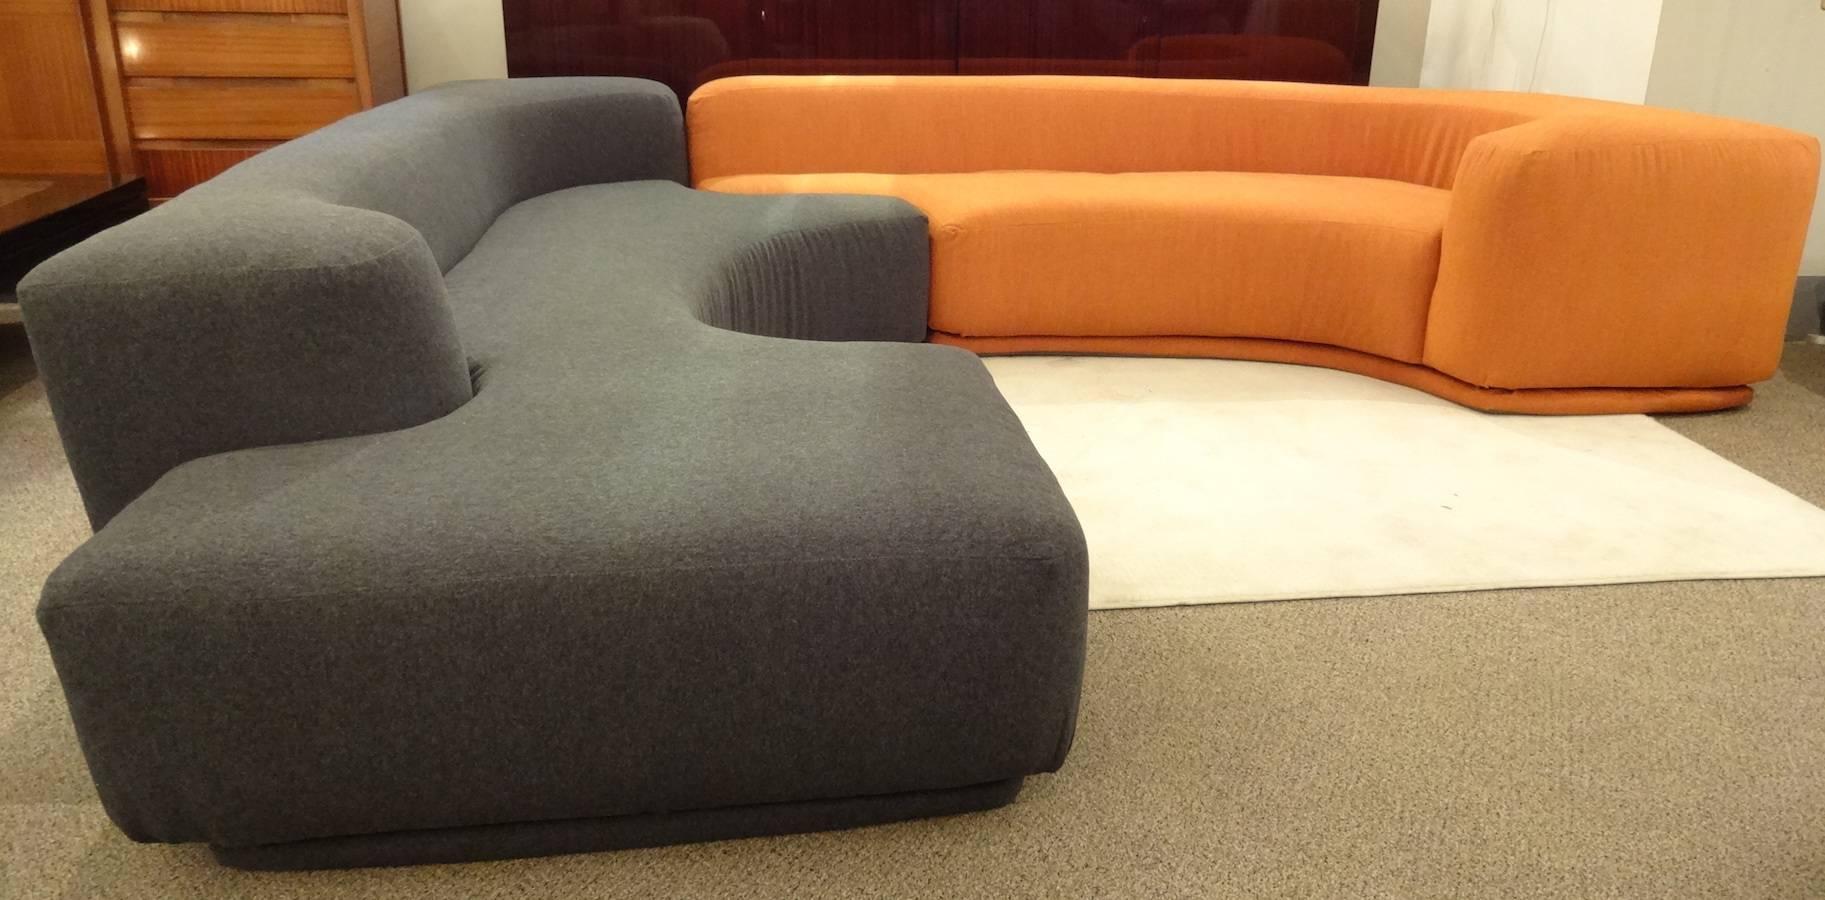 A modernist sectional two piece sofa, model "Lara", comprised of two shaped interlocking sections with a tight seat and back. The sectional was designed in 1958 but produced in 1968. It has been newly upholstered in a charcoal and pumpkin